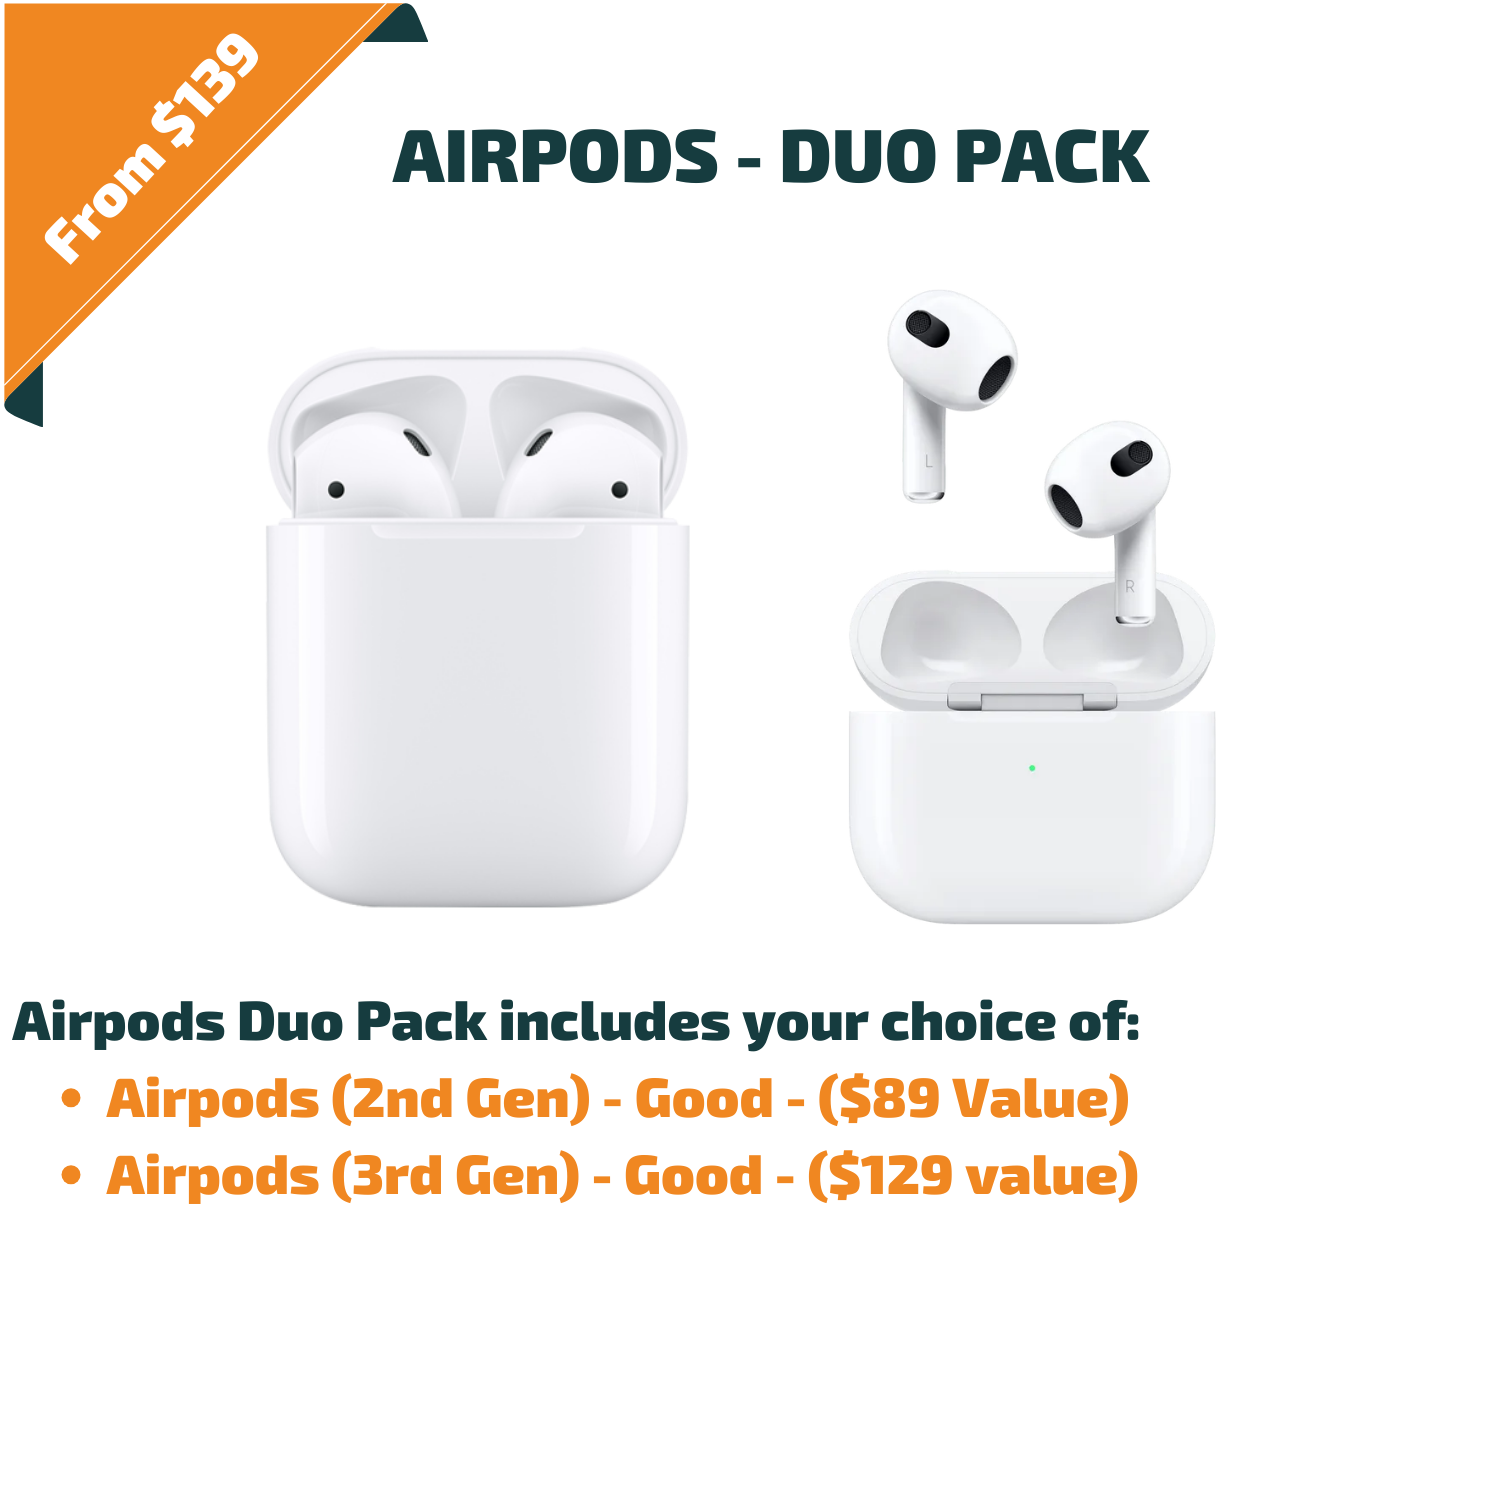 Airpods - Duo Pack